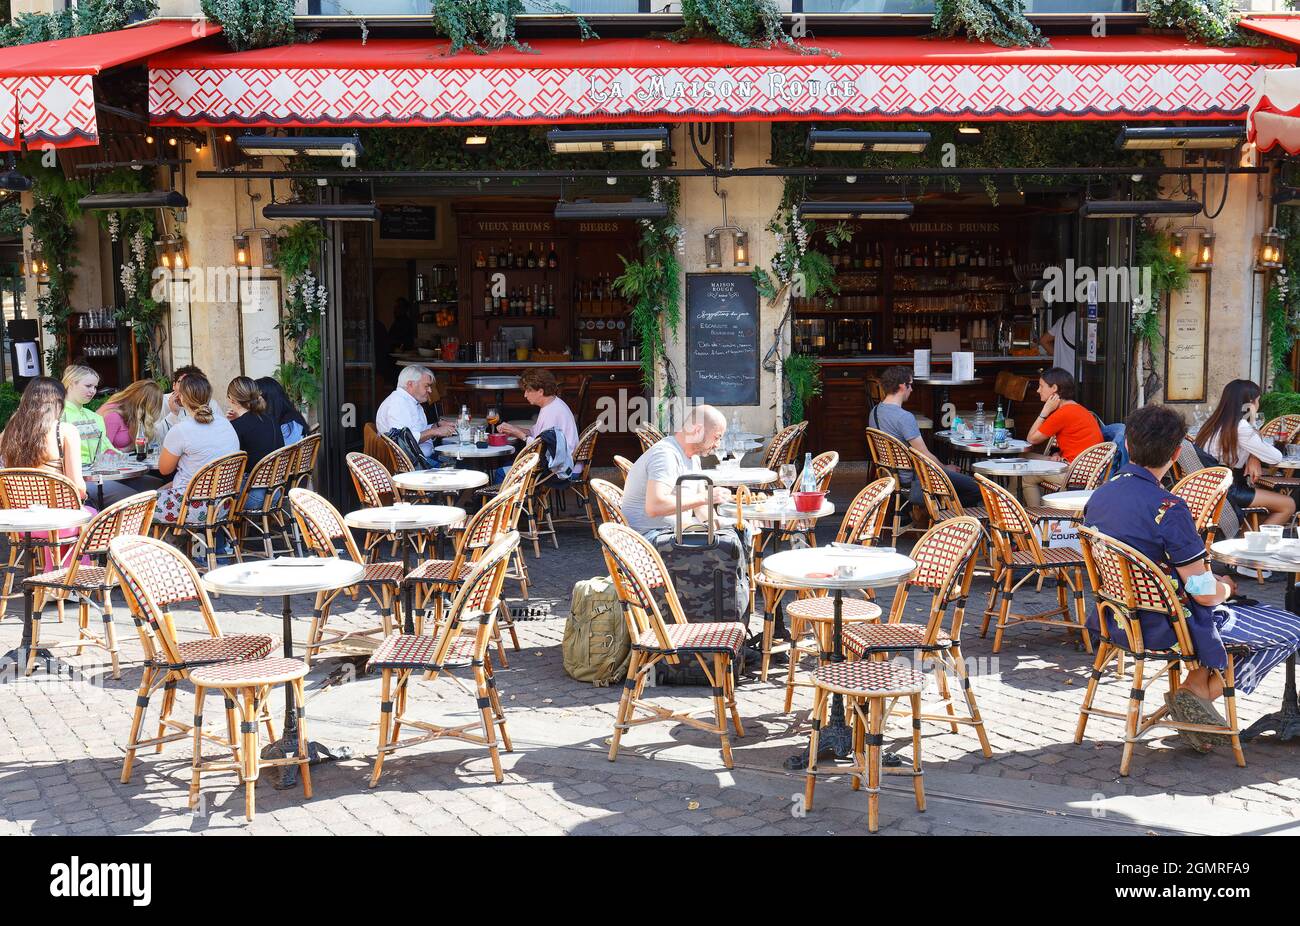 The traditional French Cafe La Maison Rouge located in the famous Les Halles quarter in Paris. France. Stock Photo